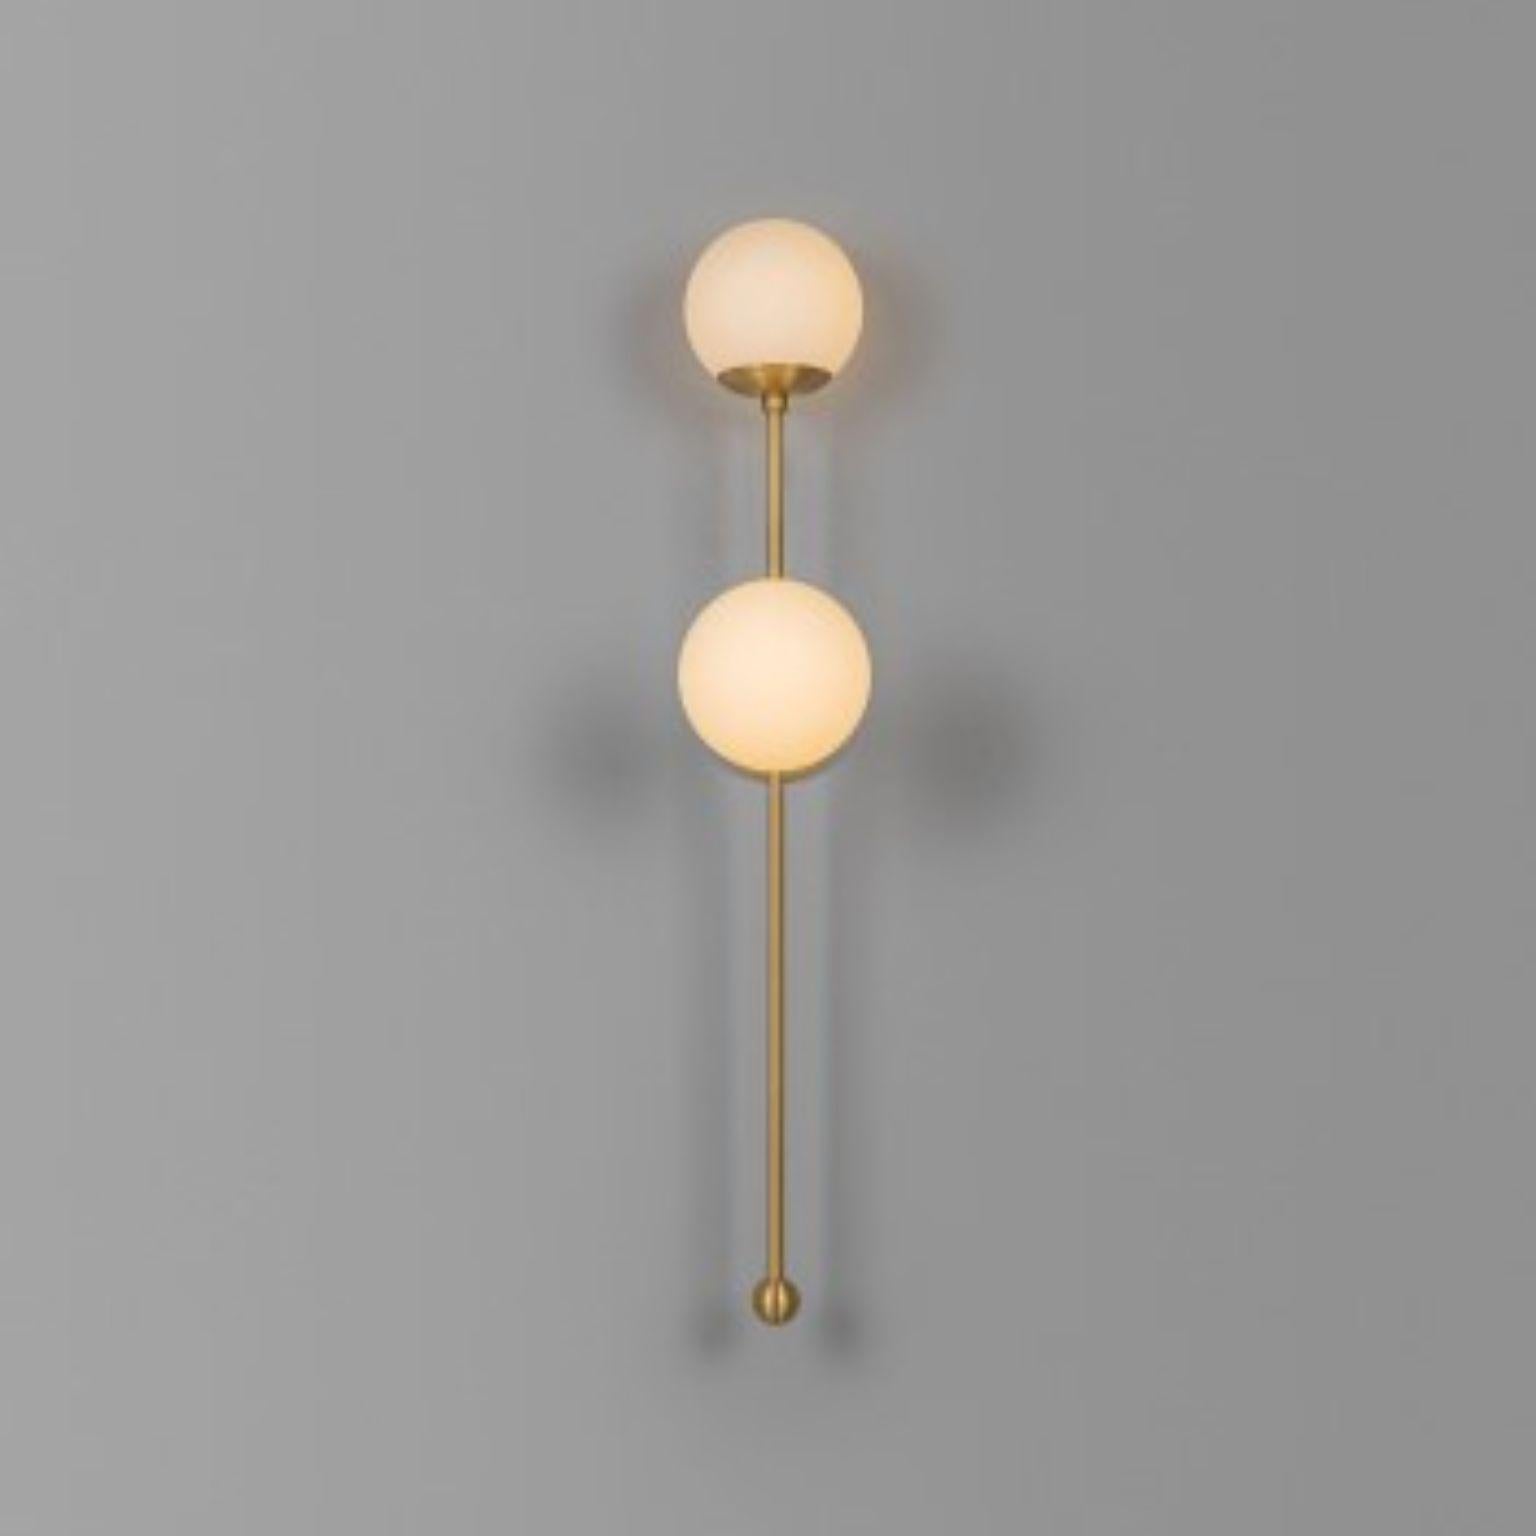 Globe Dual Wall Sconce by Schwung
Dimensions: W 15 x D 33 x H 92.2 cm
Materials: Brass, Opal glass
Weight: 2.1 kg

Finishes available: Black gunmetal, polished nickel, brass
Other sizes available.

 Schwung is a german word, and loosely